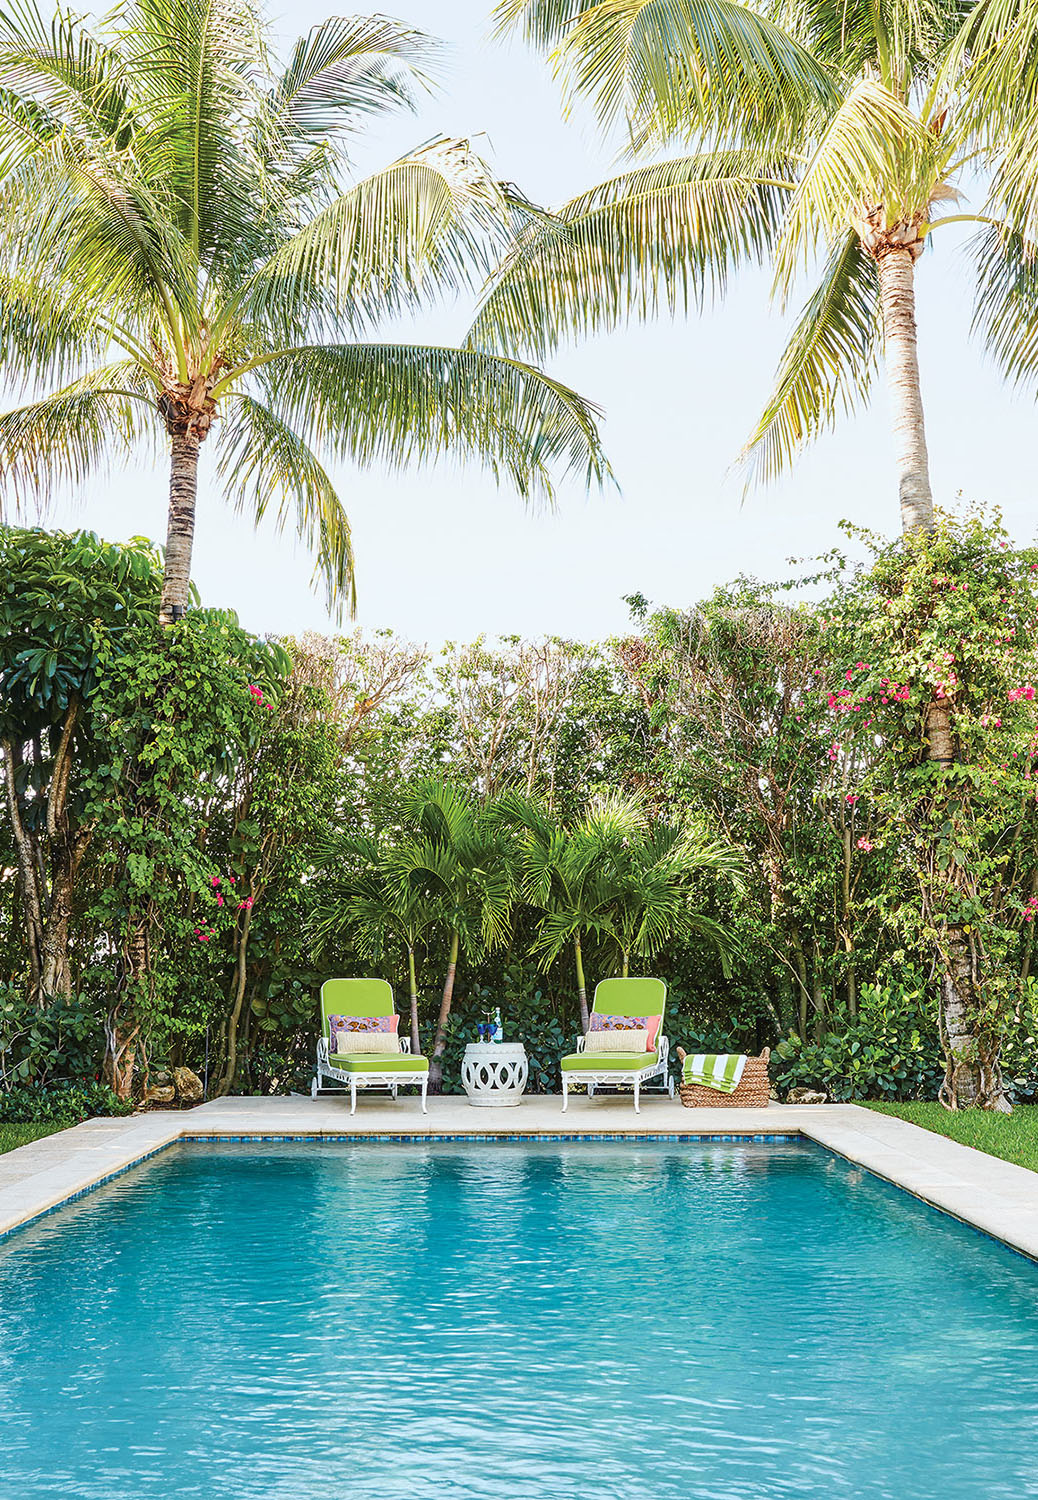 Pool flanked by palm trees with pair of lounges at end.